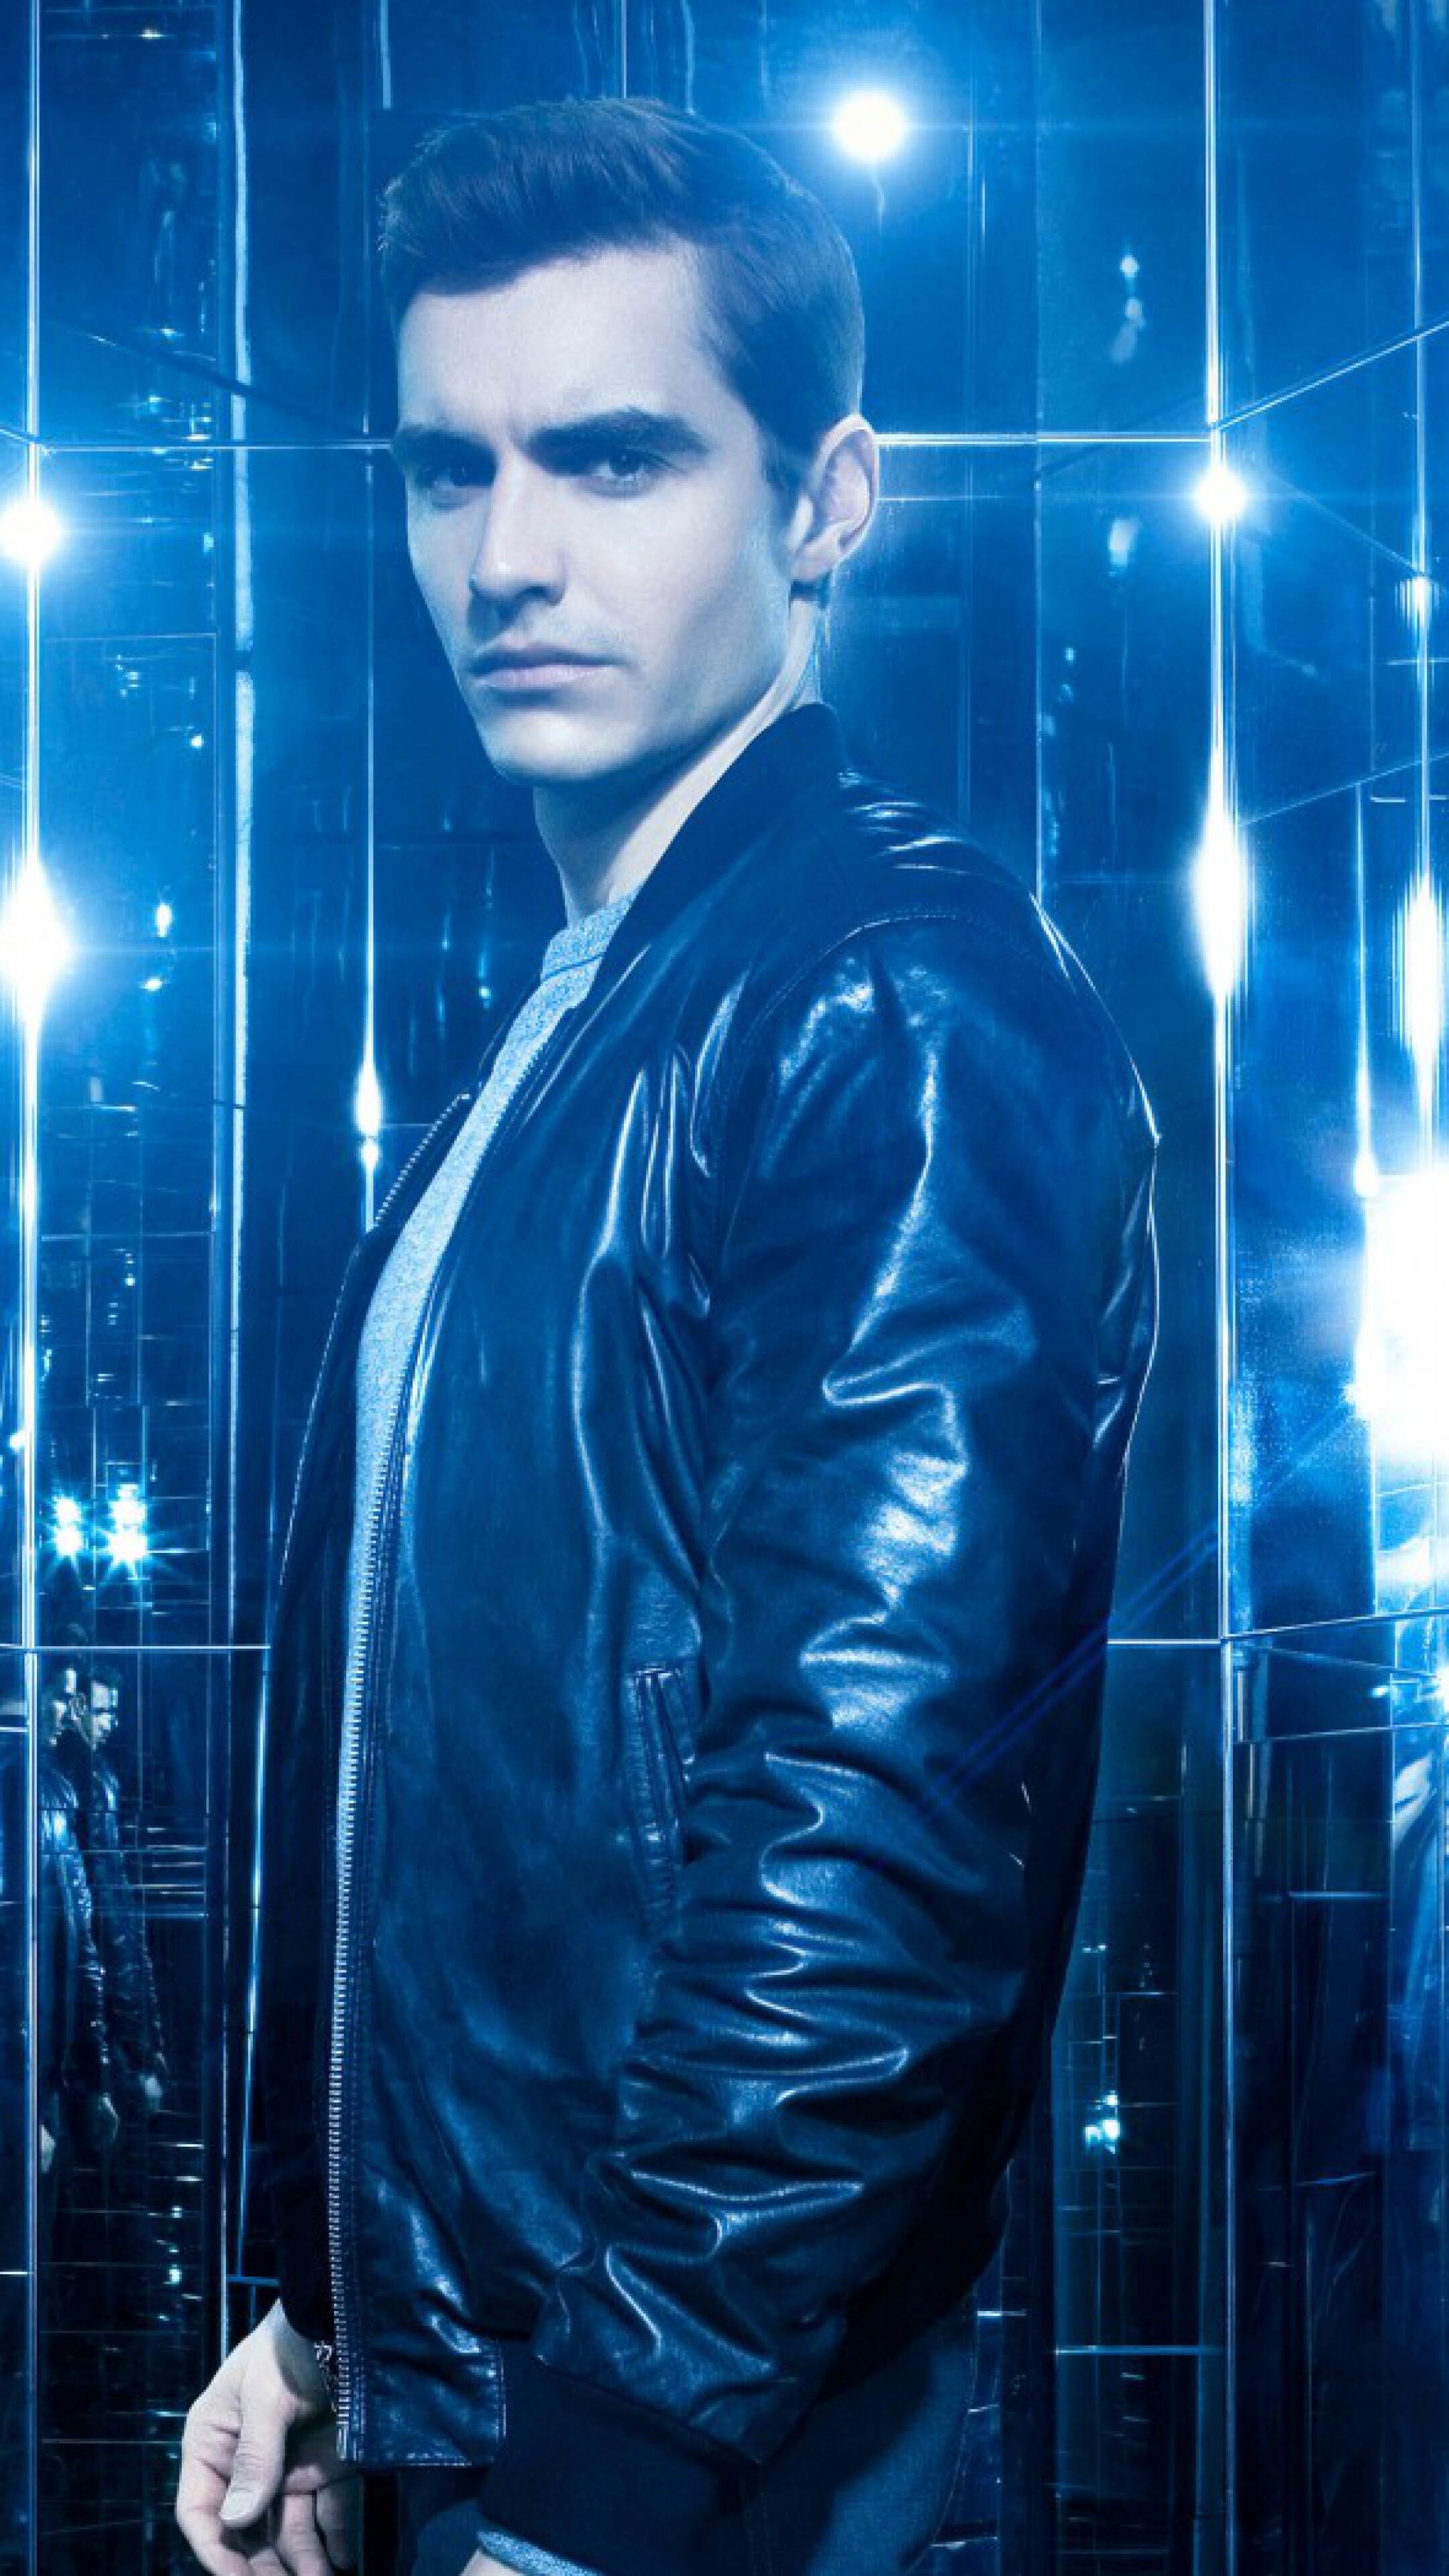 Dave Franco: Played Eric Molson in a 2012 American buddy cop action comedy film,21 Jump Street. 2160x3840 4K Wallpaper.